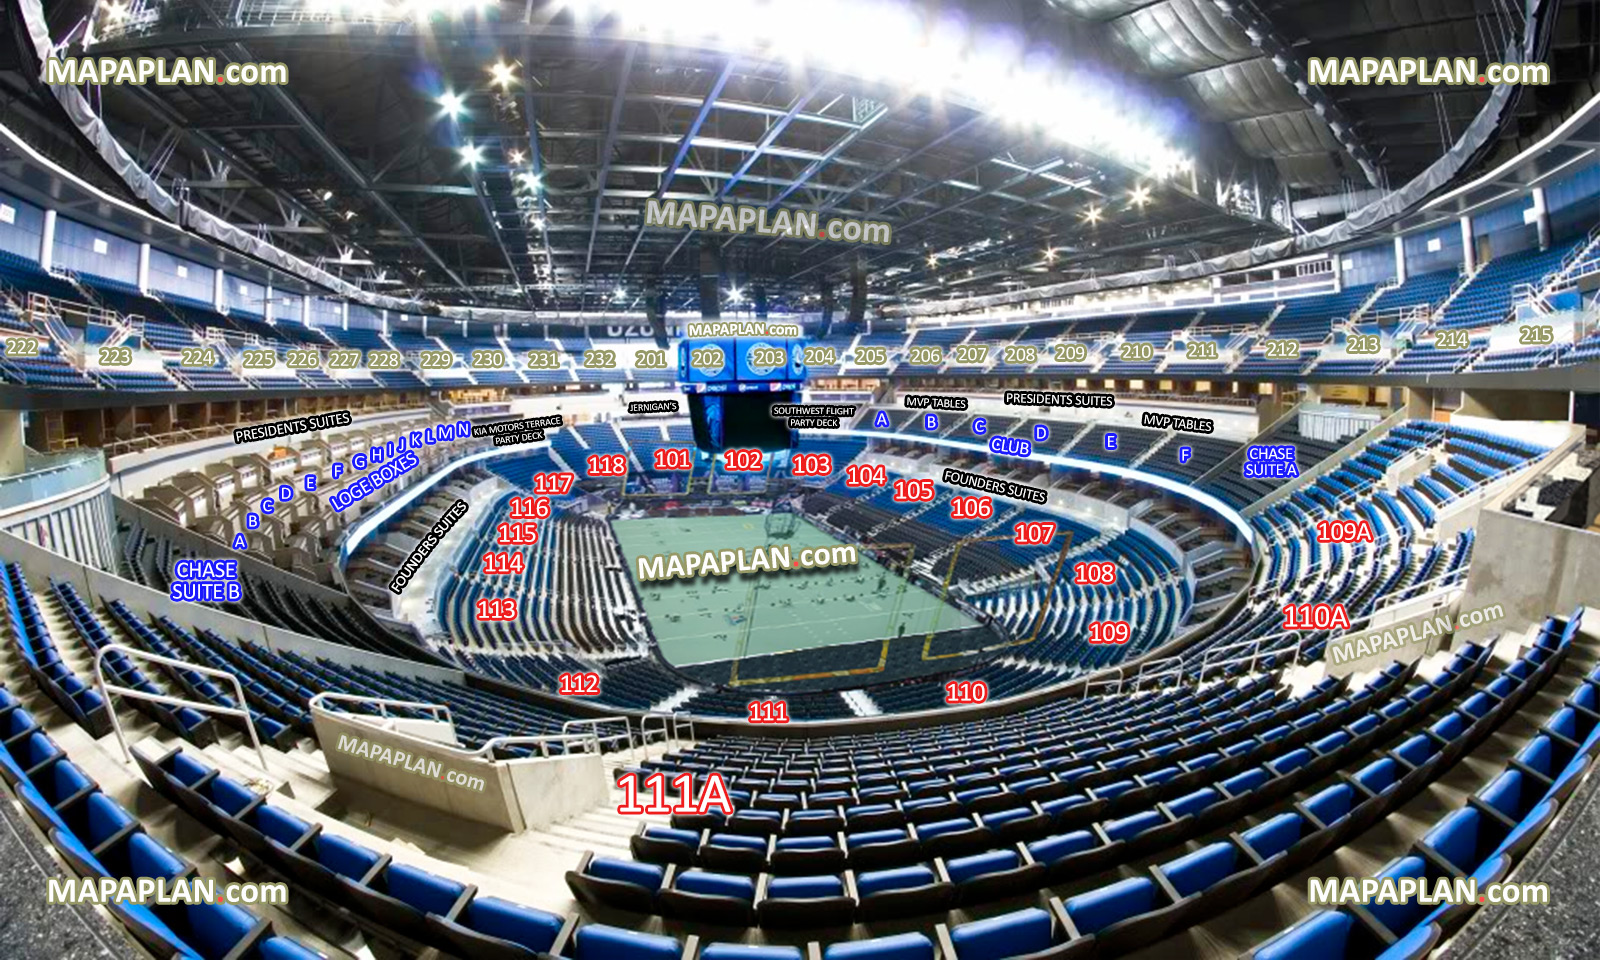 Orlando Amway Center View from Section 111A Row 35